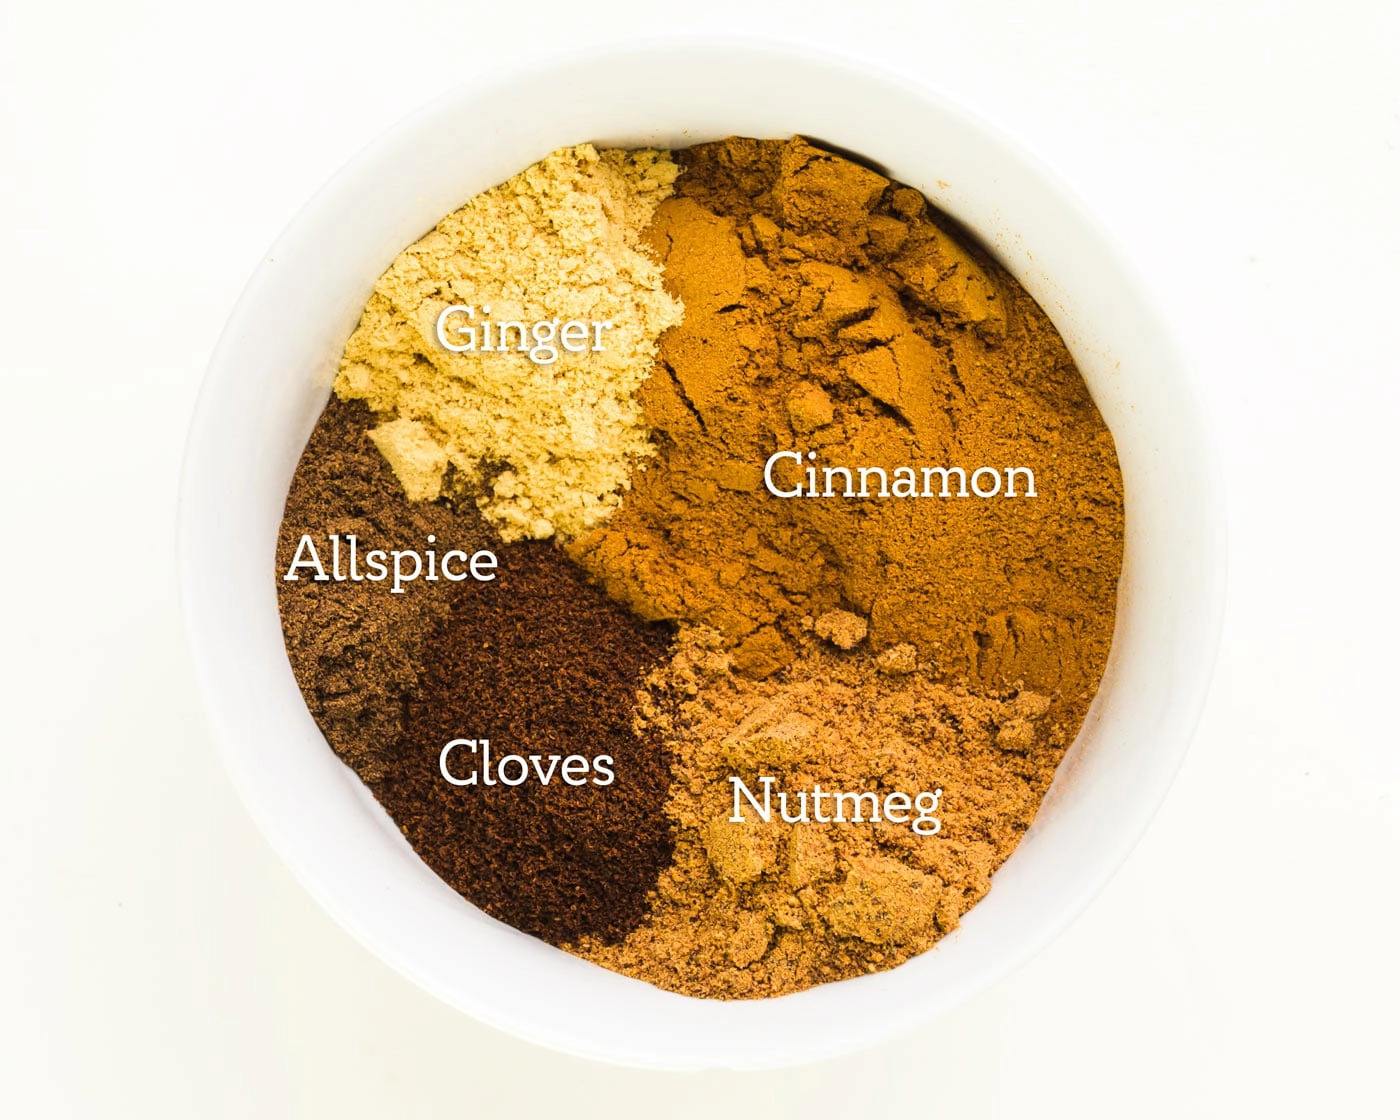 A bowl holds several spices with these words on top: cinnamon, nutmeg, cloves, allspice, and ginger.